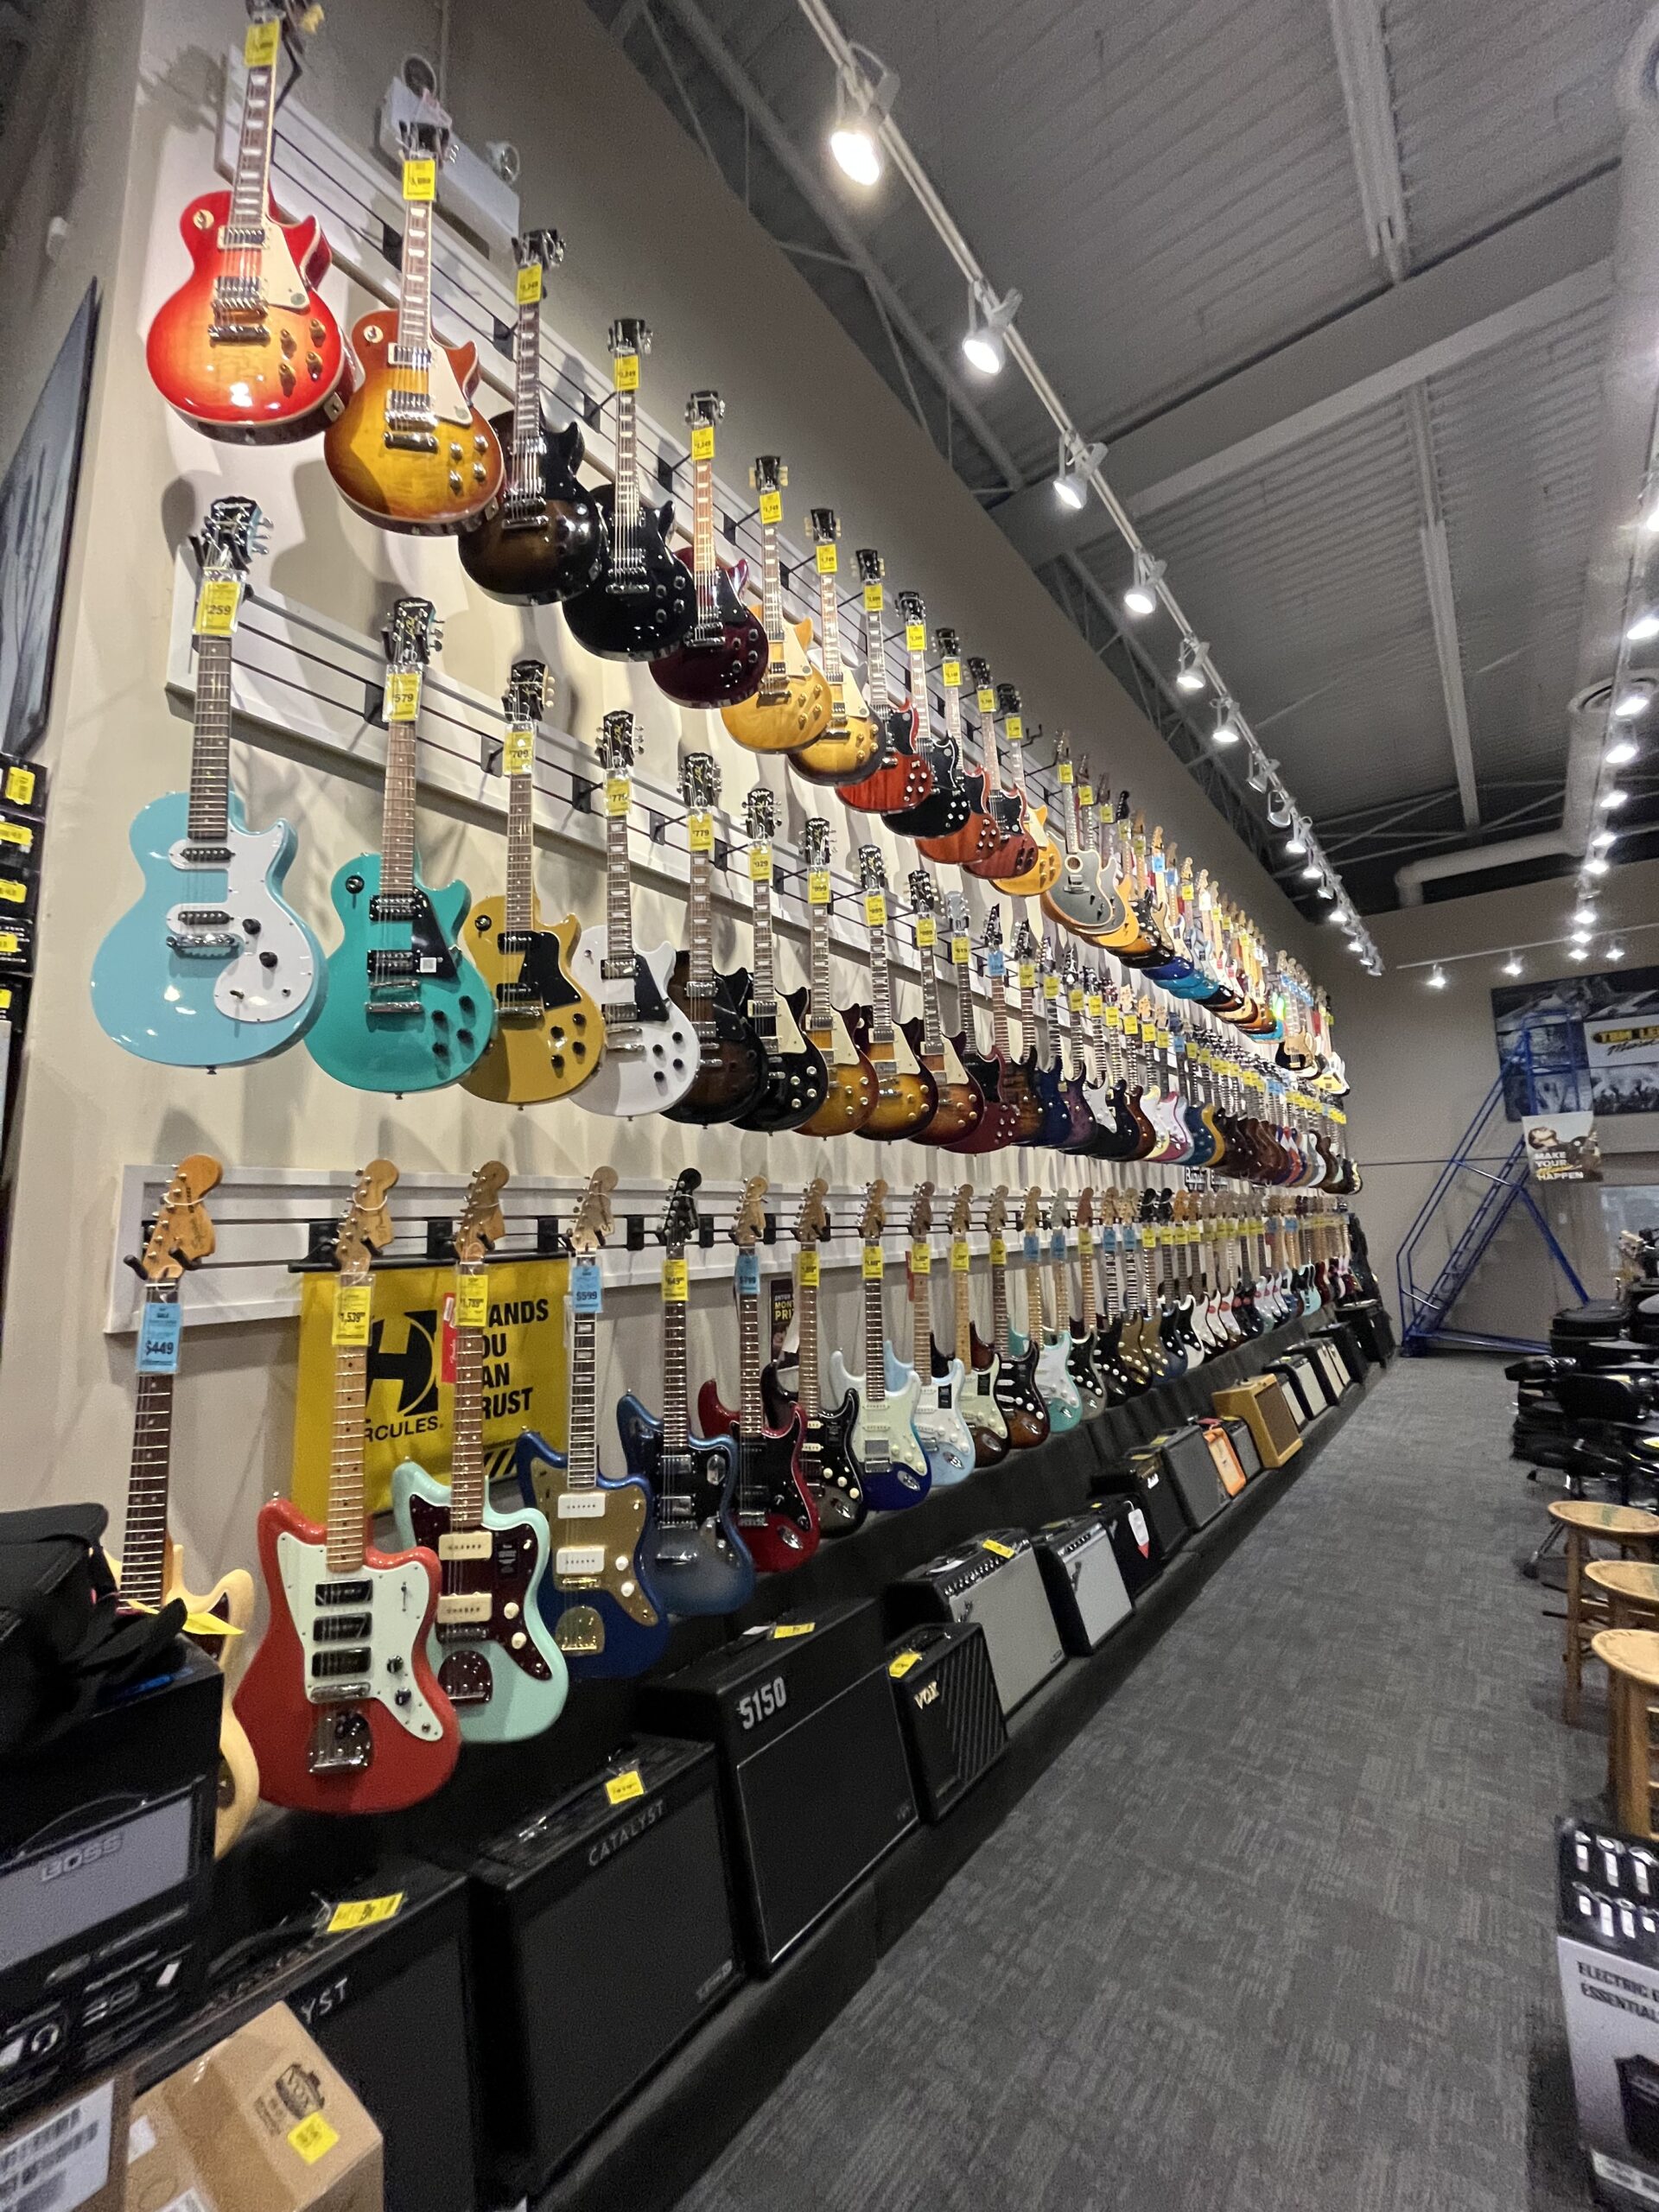 A wall of dozens upon dozens of electric guitars at a local guitar store. There are three rows of guitars that go up to the high ceiling, each different in colour. The picture is a splash of vibrancy displaying the beauty of a sguitar store and its electric guitars